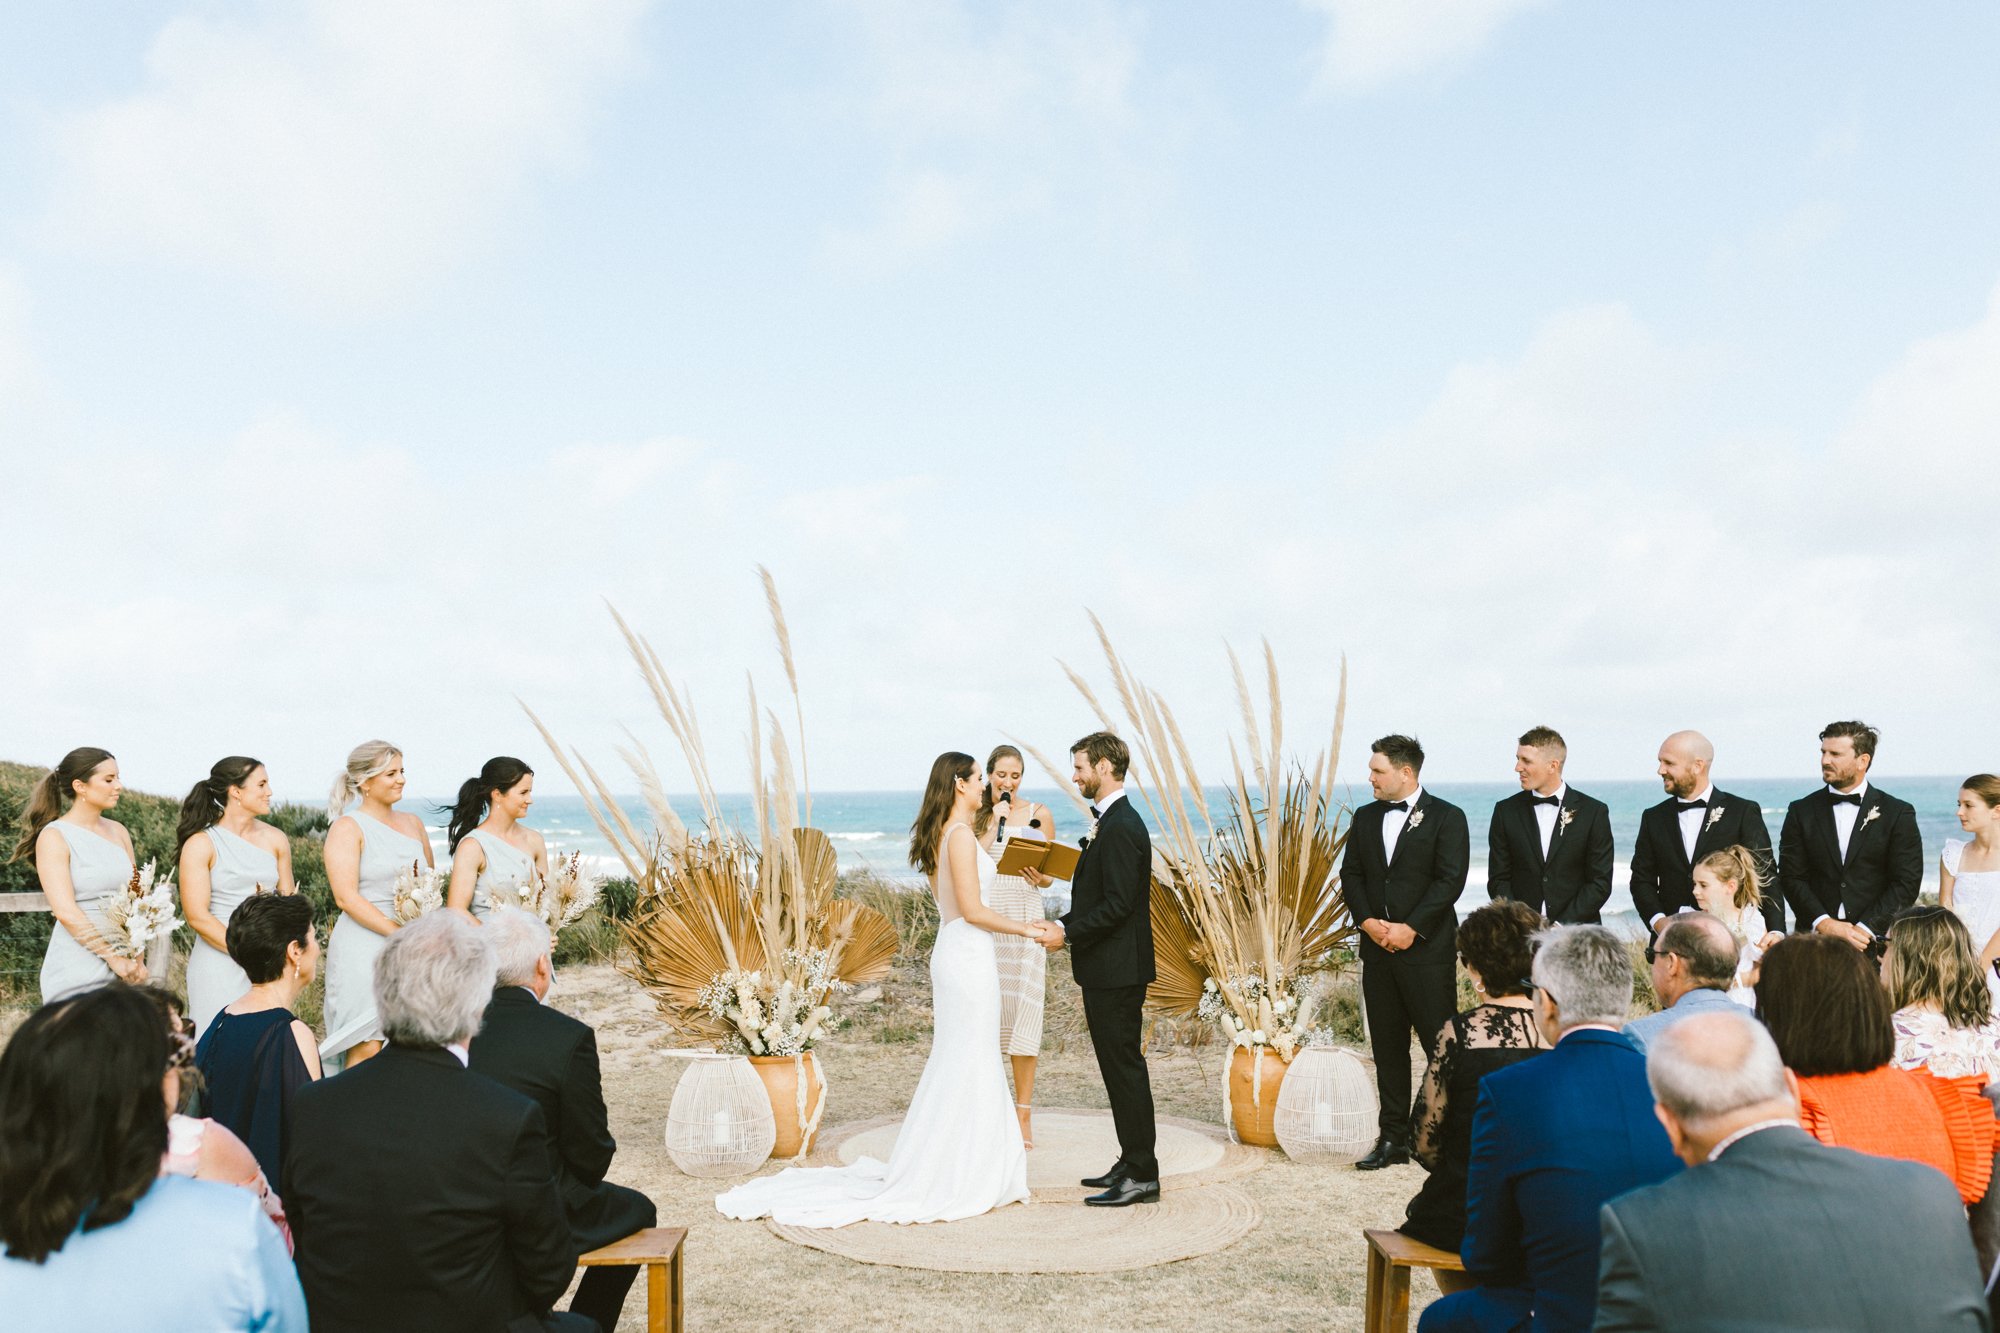 0022_2022_02_25_Chrissy_and_Jay_at_The_Dunes_by_HandZaround_Video_Photography_Sneak_Peek.jpg